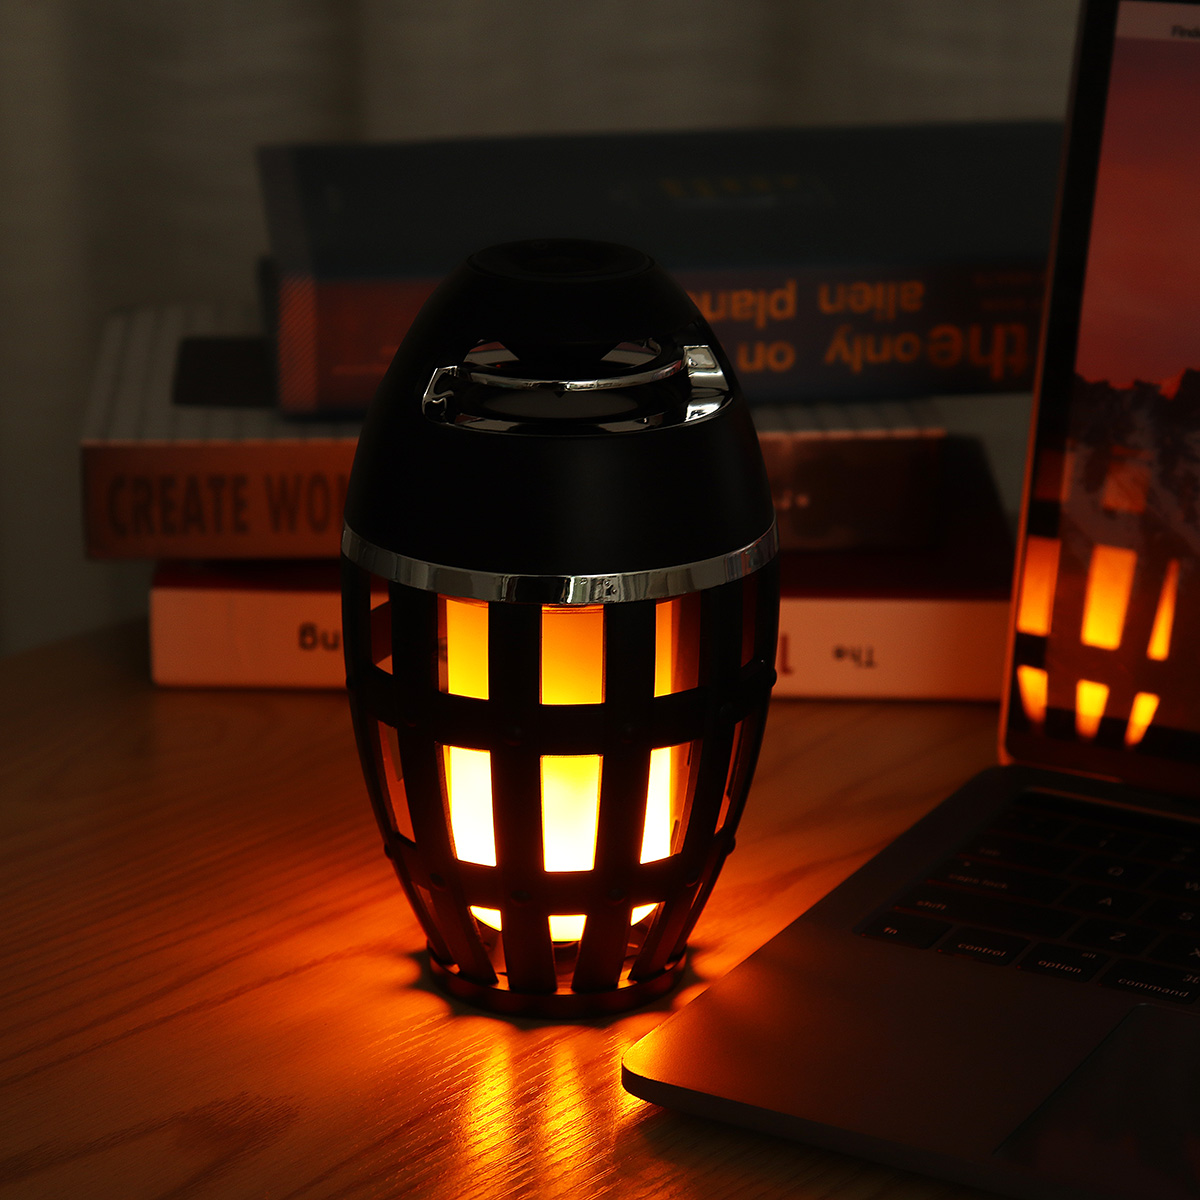 Outdoor-bluetooth-Speaker-LED-Flame-Light-Table-Lamp-Torch-Atmosphere-Bright-Night-Light-DC5V-1730264-10